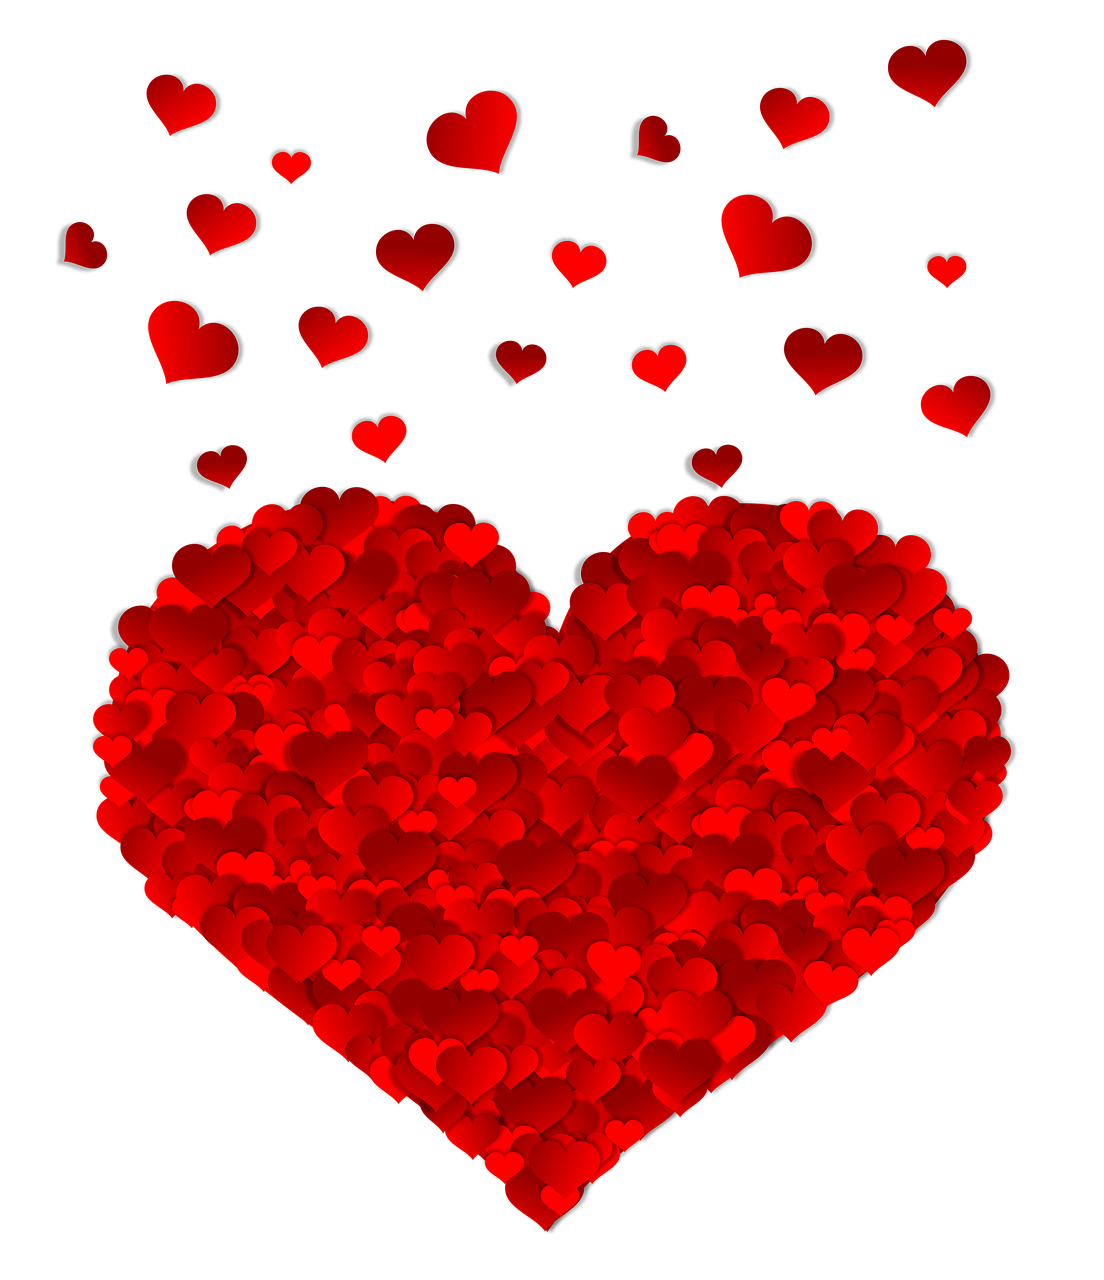 Heart,st valentine's day,love,feelings,holiday - free image from needpix.com1104 x 1280